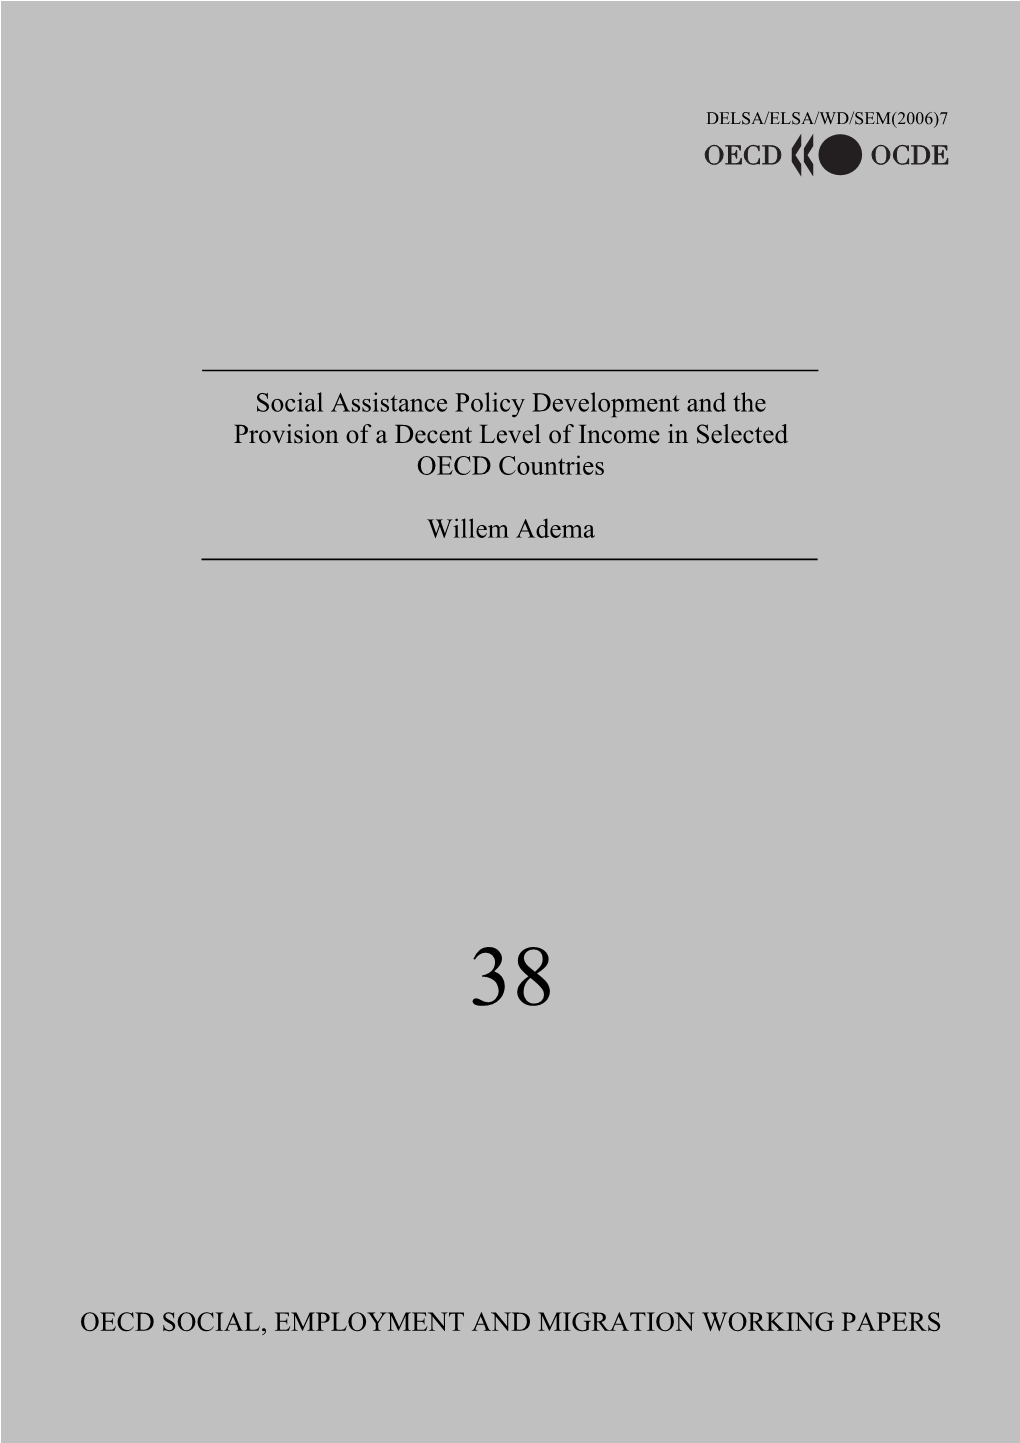 Social Assistance Policy Development and the Provision of a Decent Level of Income in Selected OECD Countries